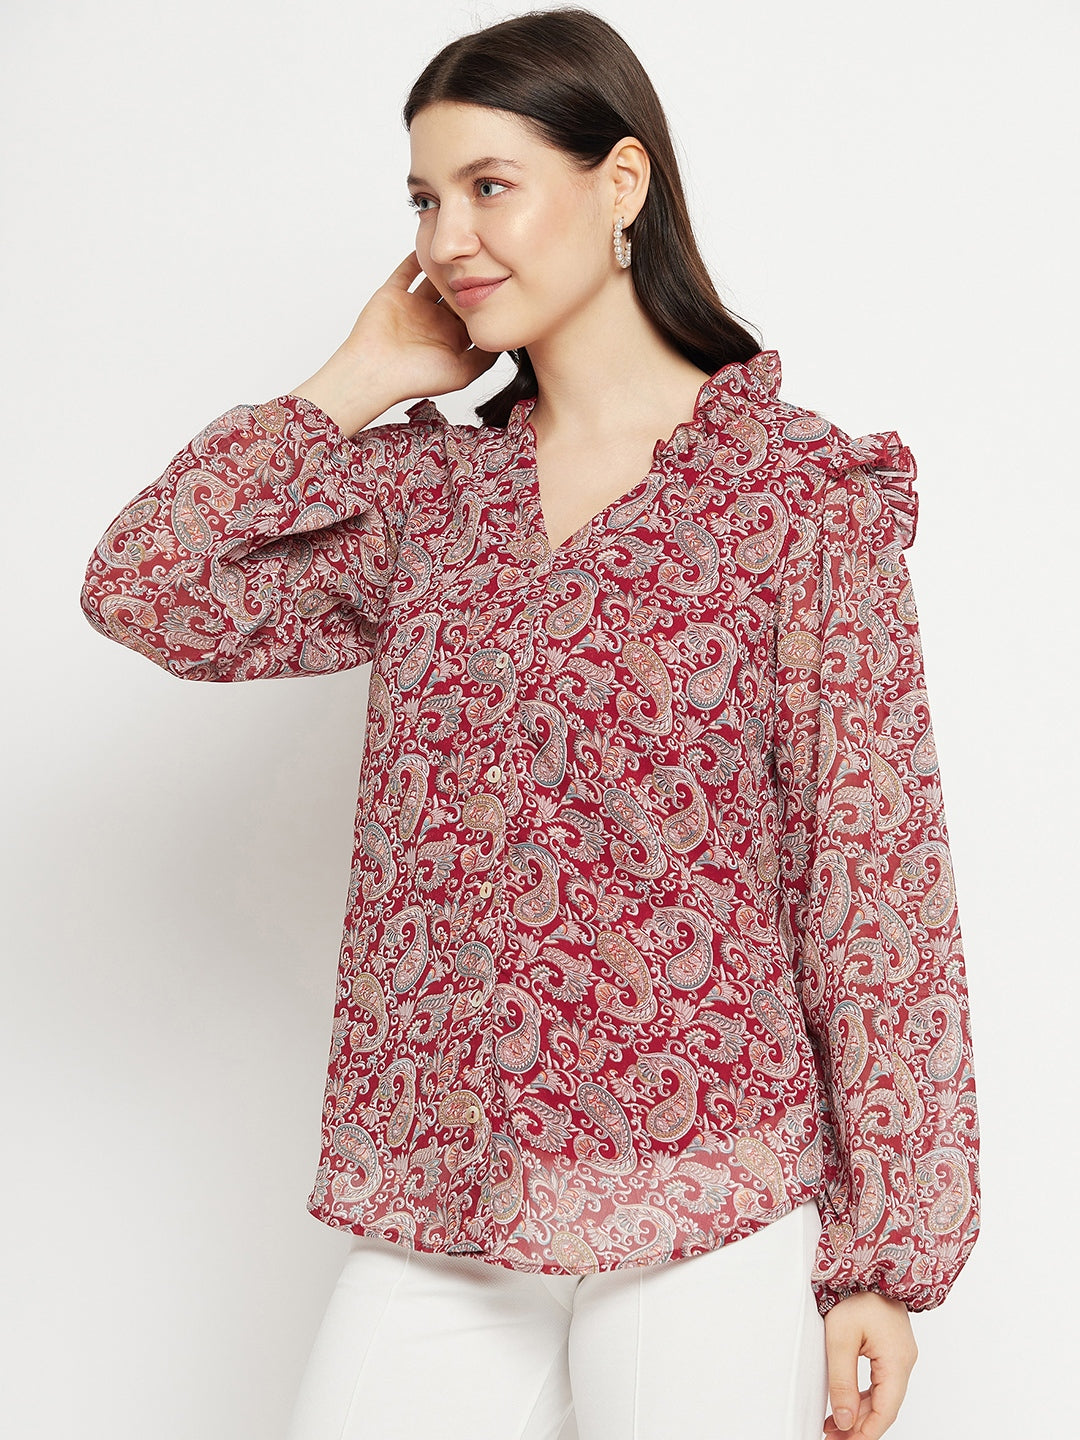 Paisley Printed Smart Opaque Georgette Casual Shirt